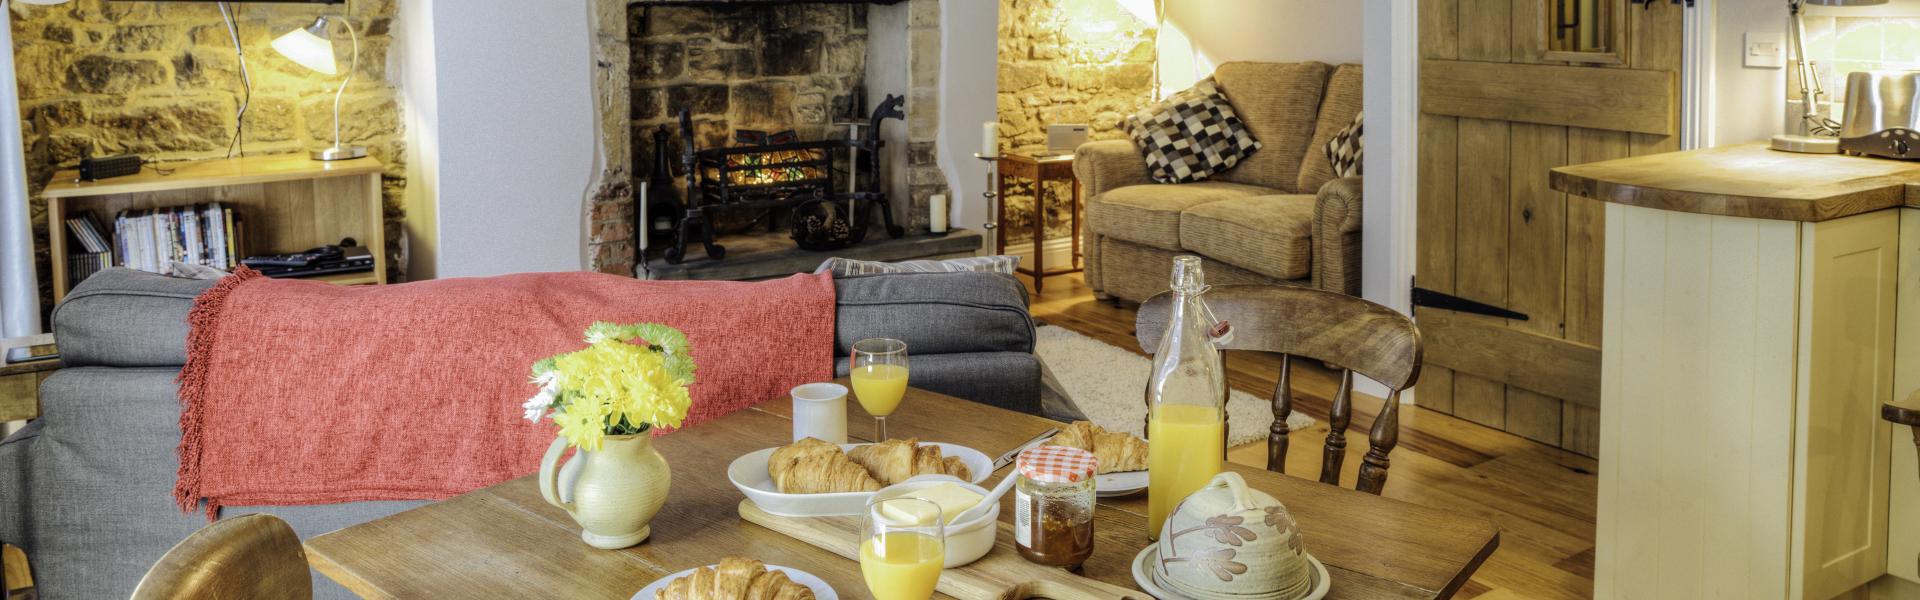 Bed and Breakfast Accommodation in Scotland - HomeToGo